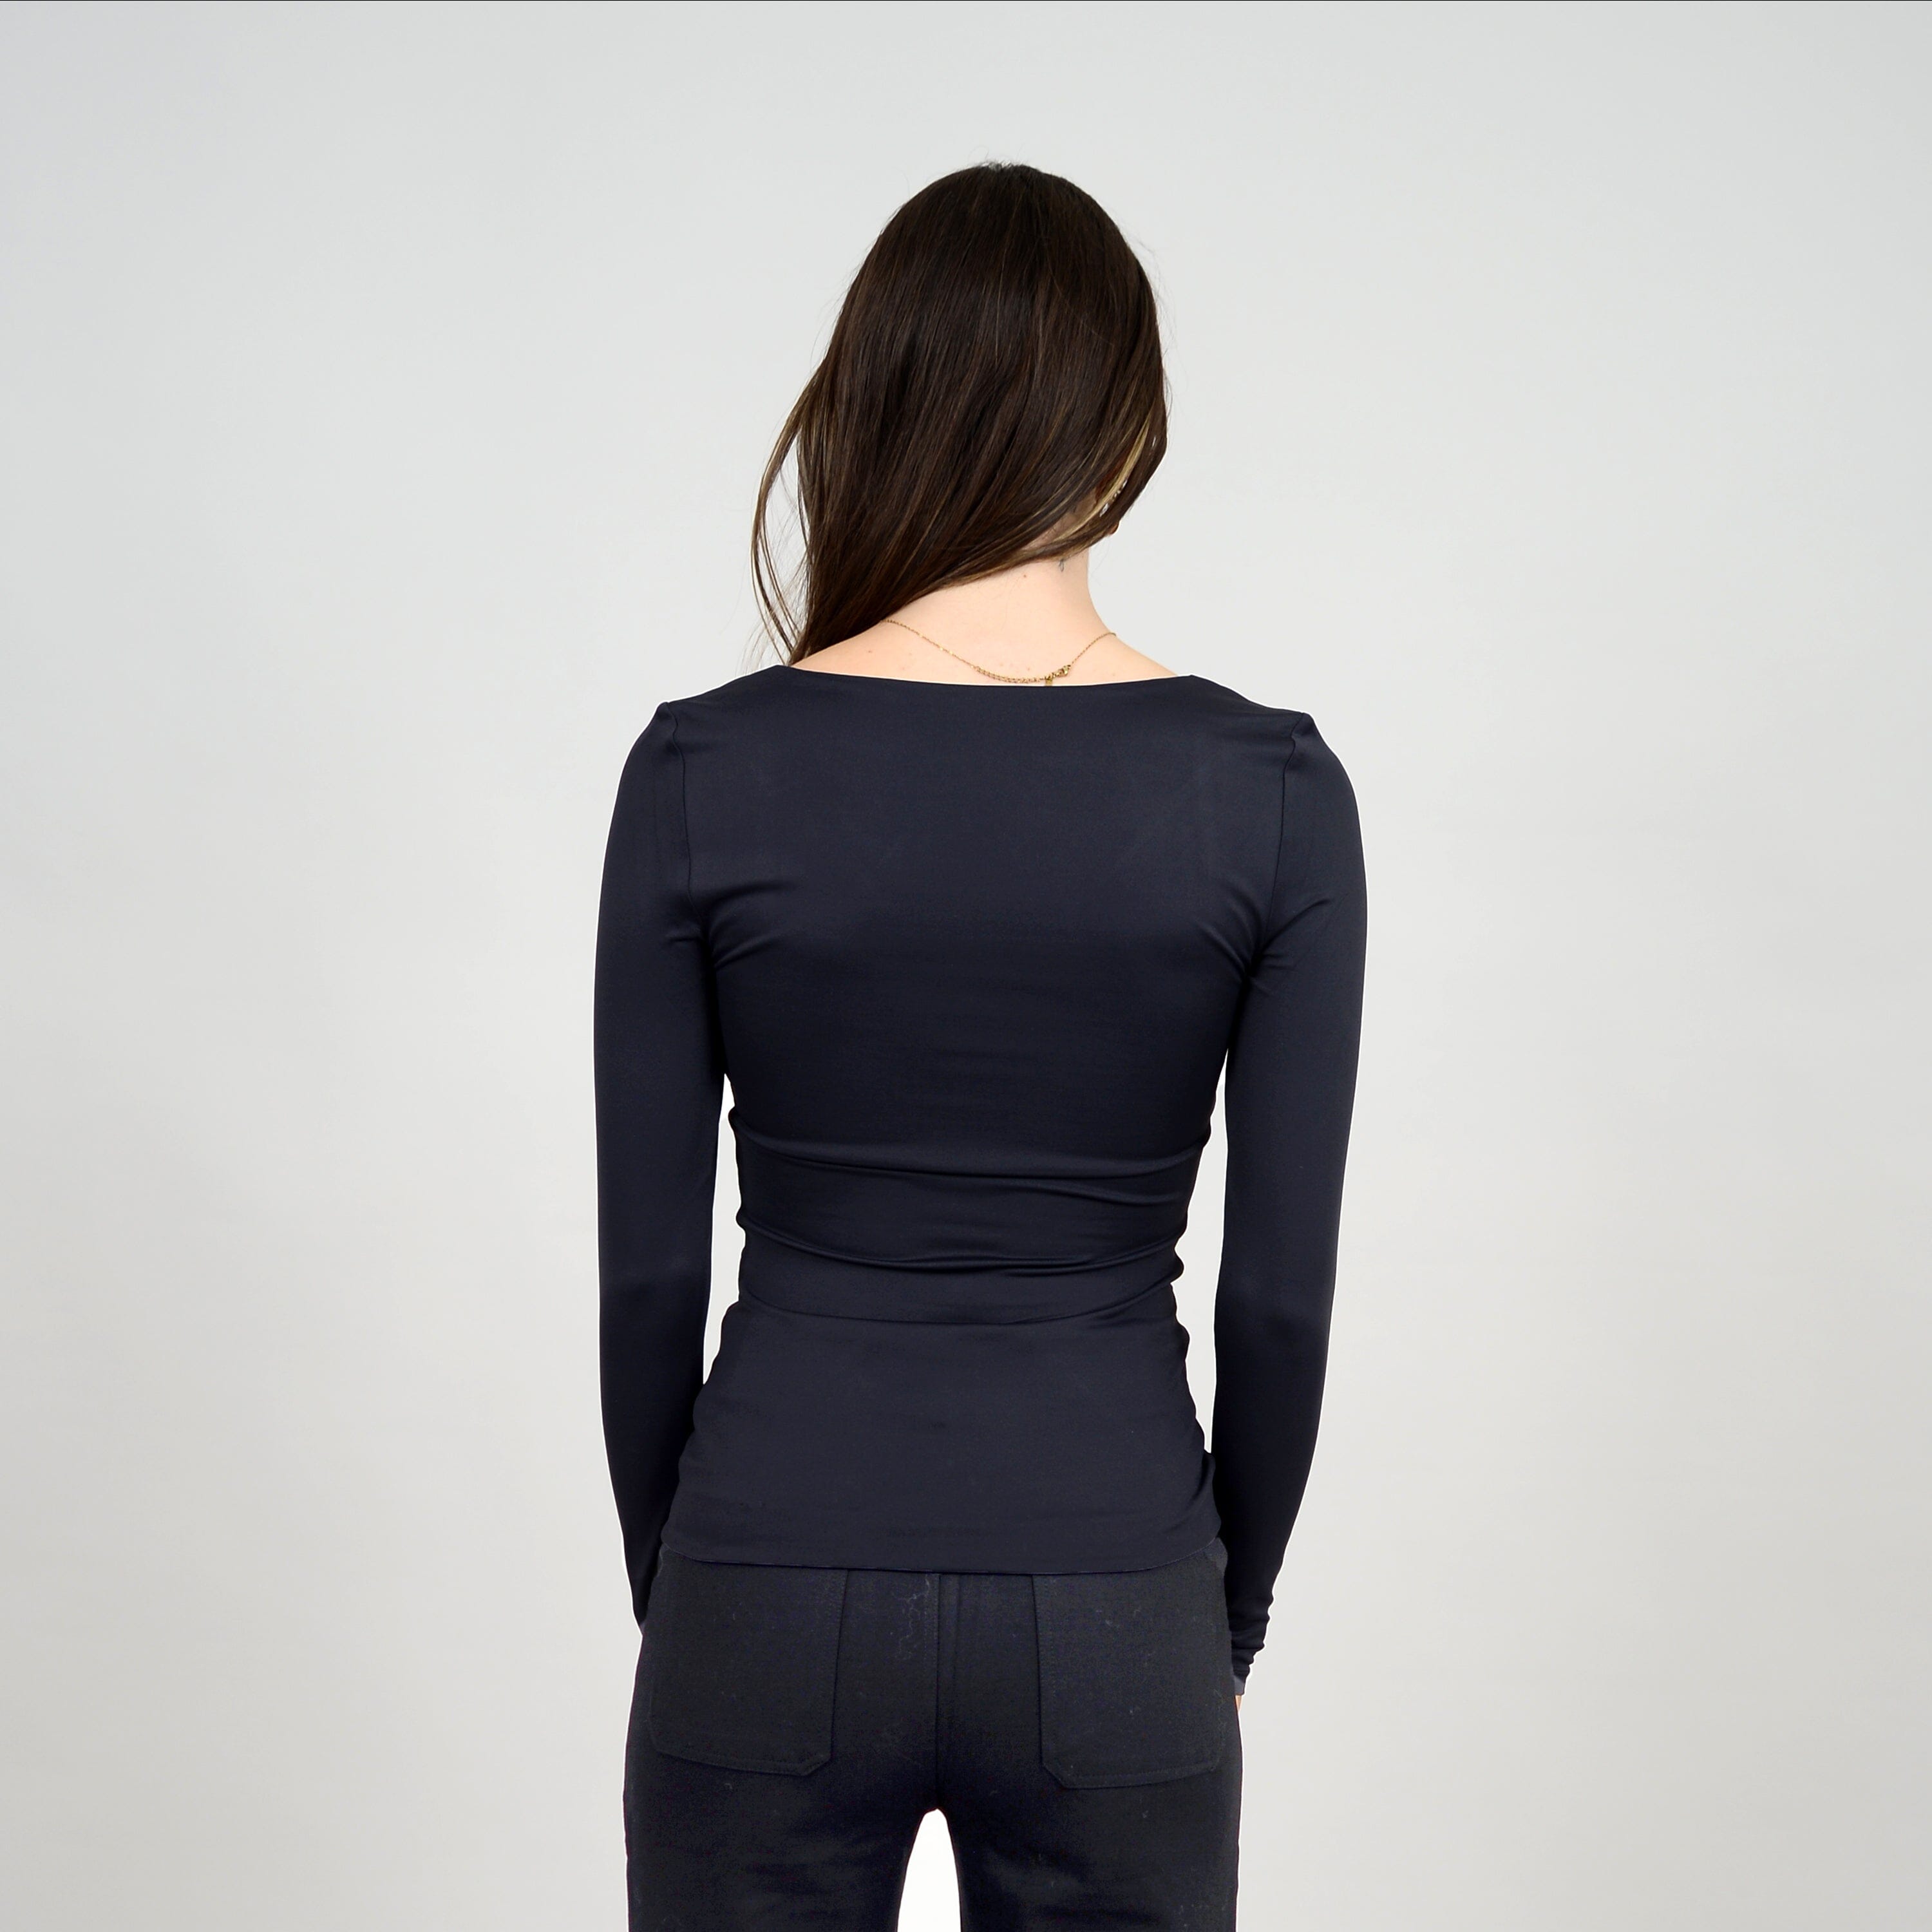 STACY SQUARE NECK LONG SLEEVE (BLACK) Top SECOND SKIN 